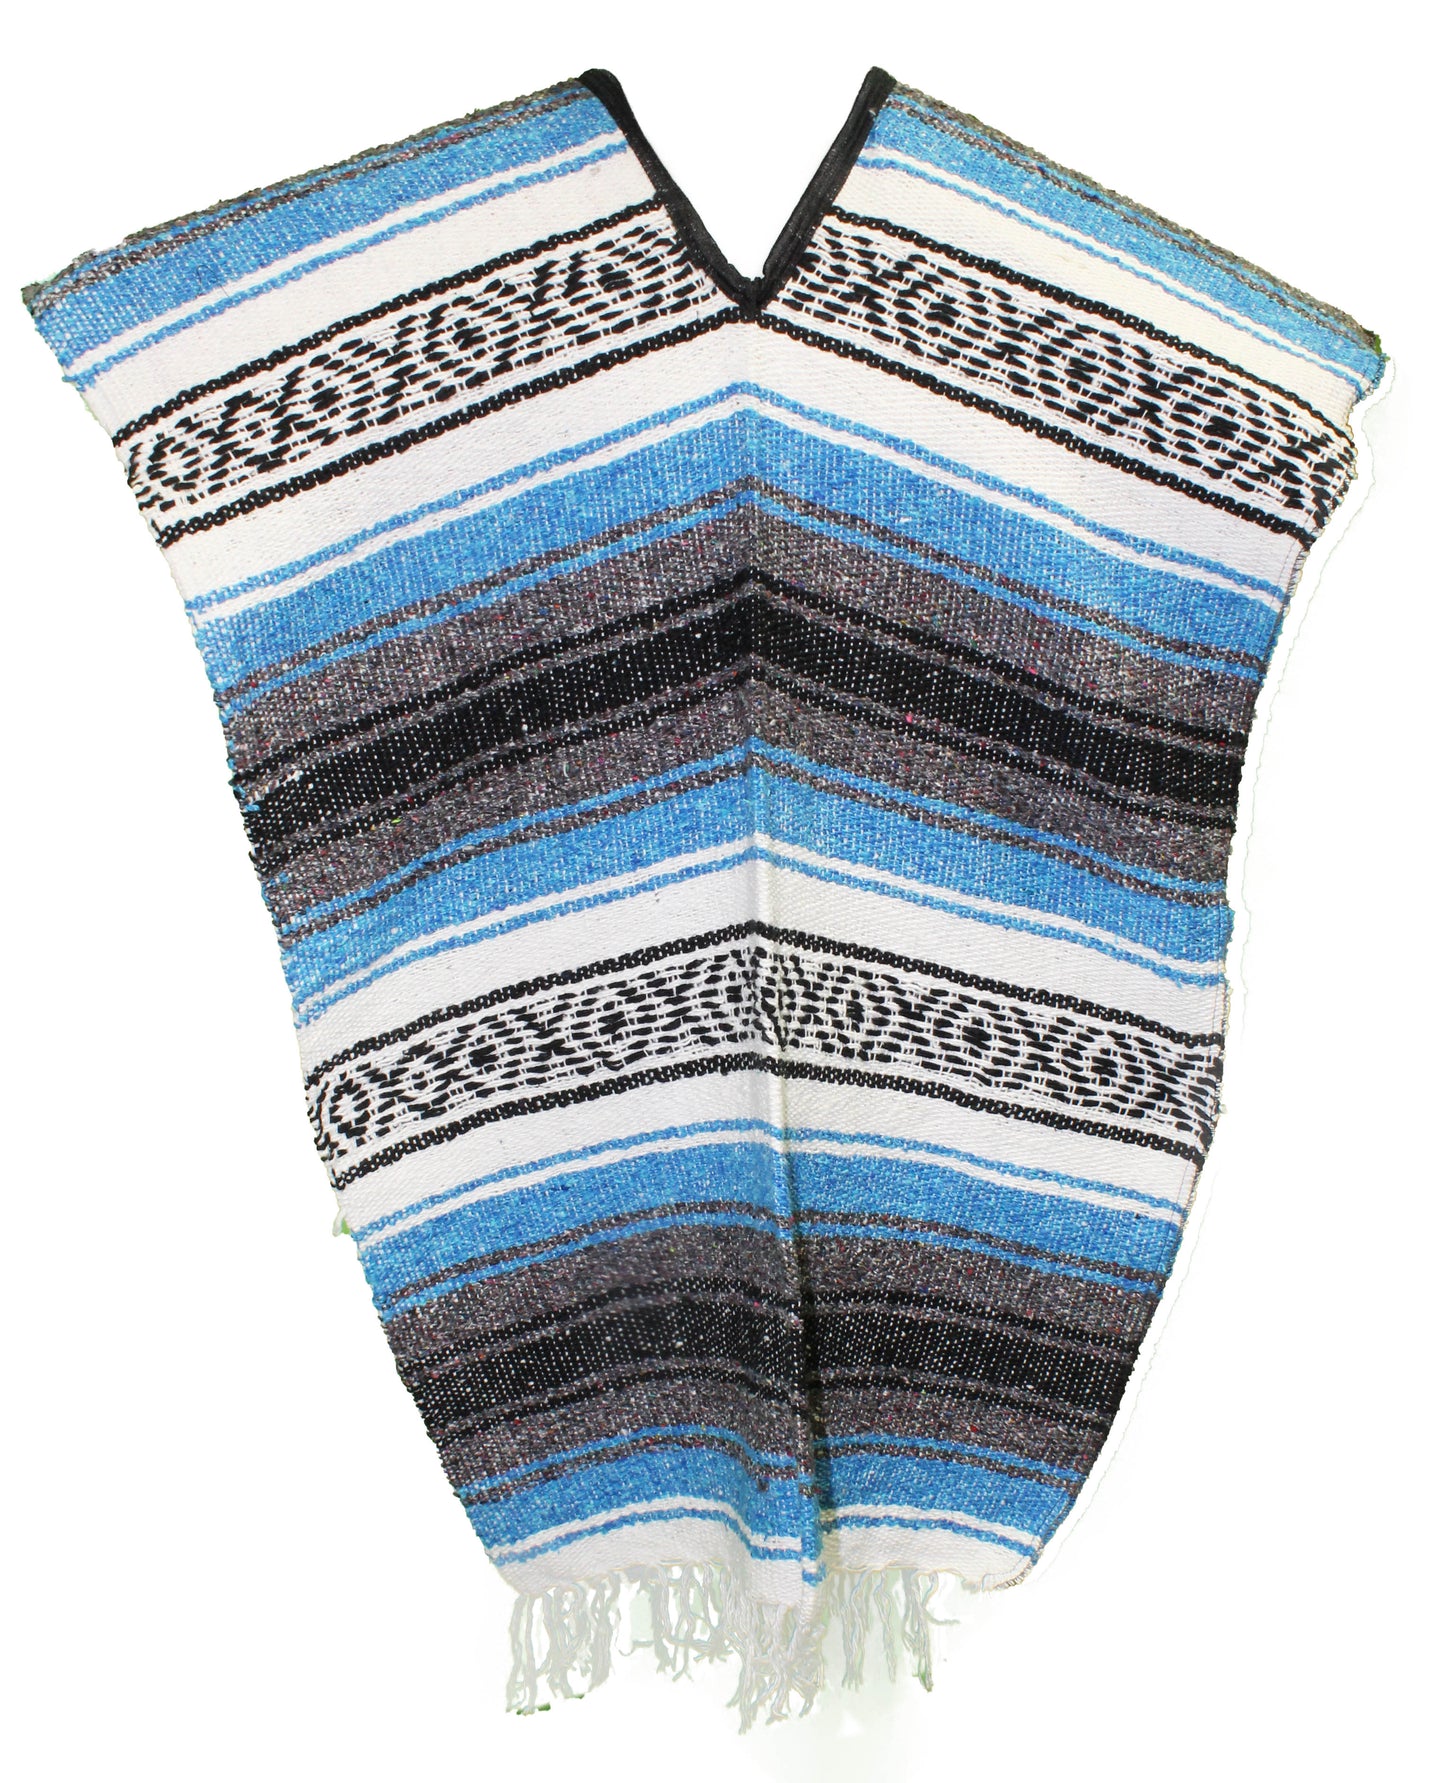 SIDREY Traditional Mexican Poncho - Turquoise